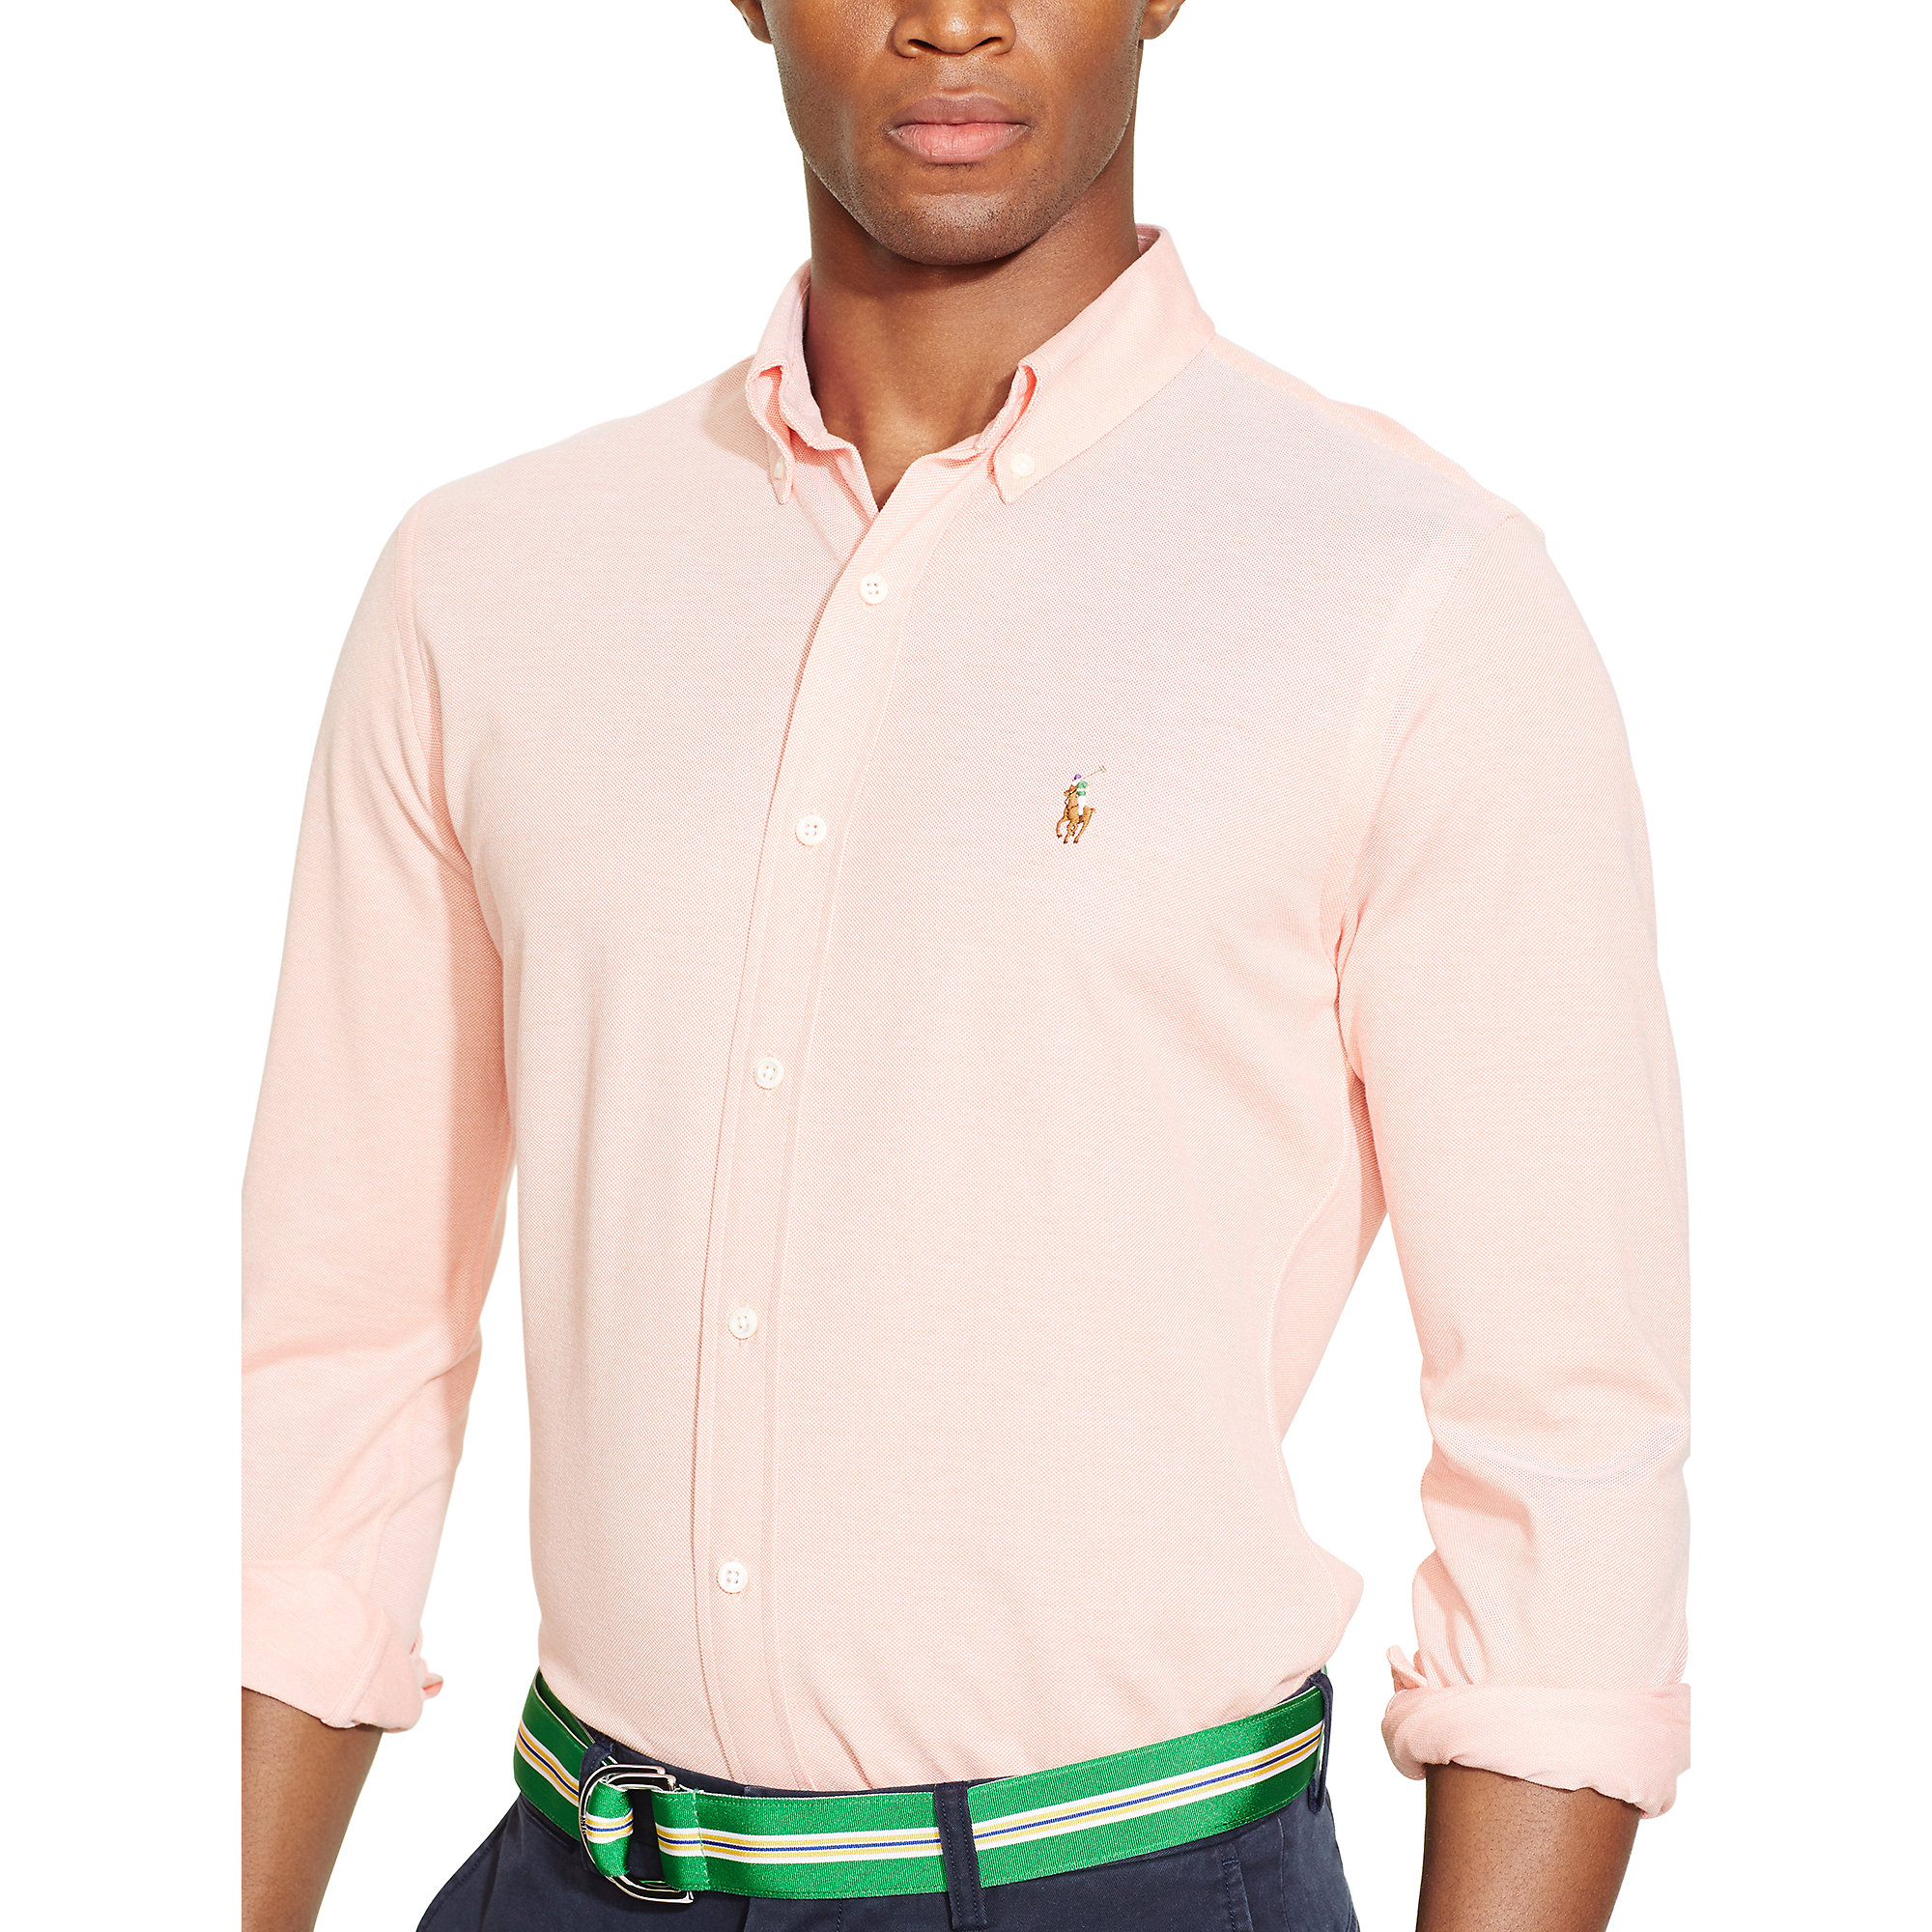 Polo Ralph Lauren Knit Oxford Shirt in Pink for Men - Lyst